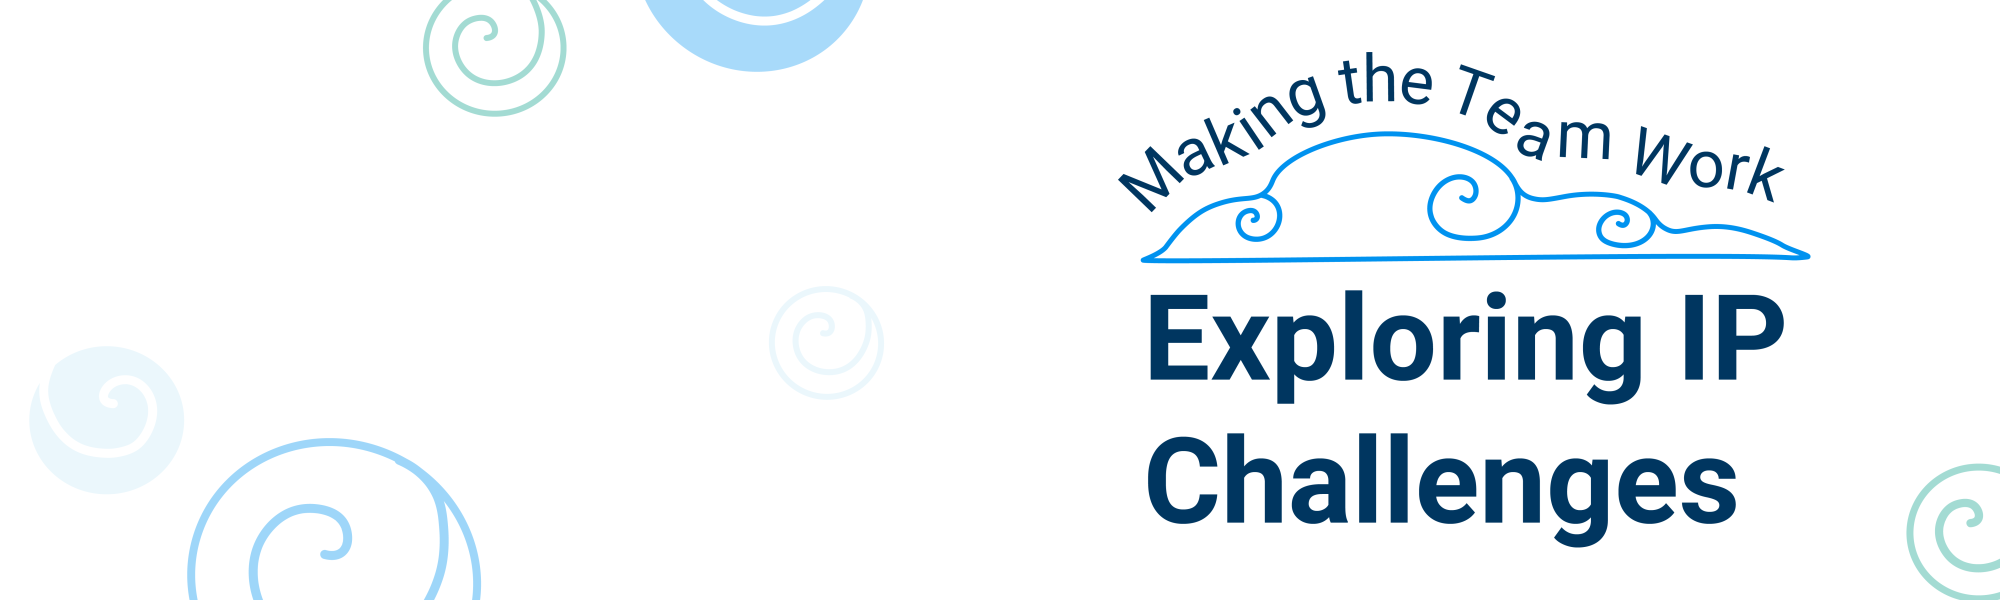 ASTP - Making the Team Work: Exploring IP Challenges